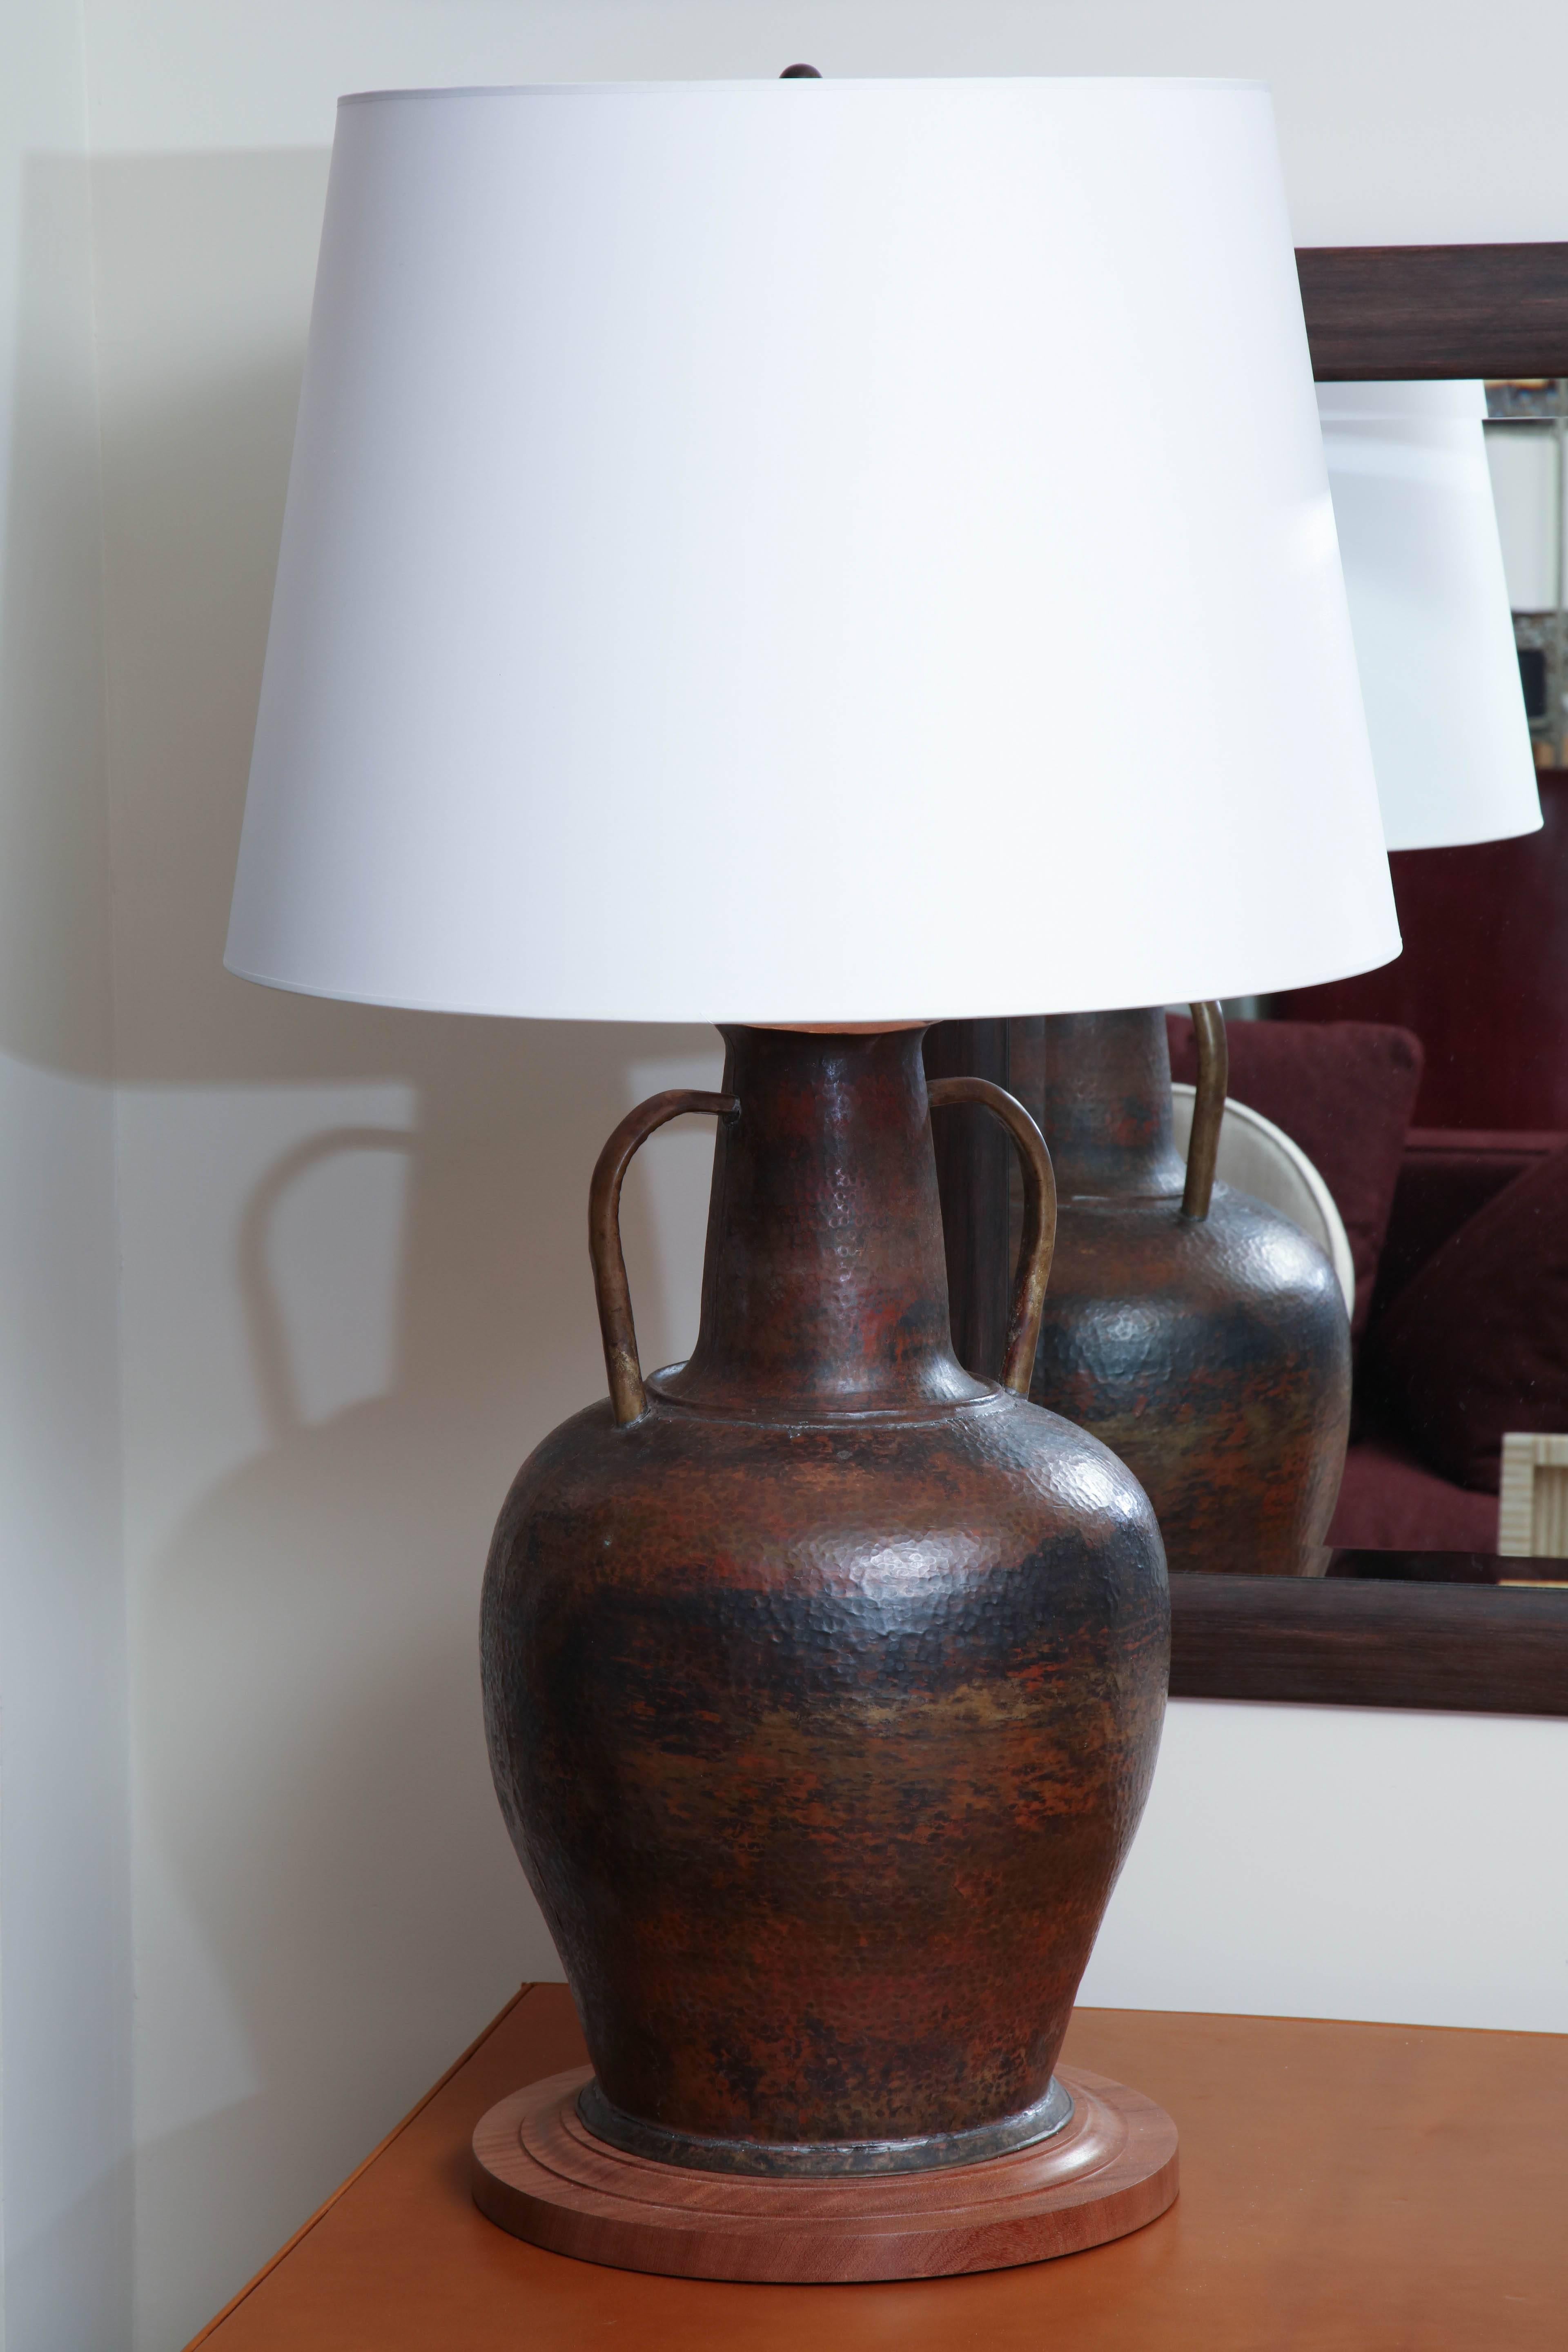 Hand-formed copper two-handled vessel from Morocco transformed into a table lamp. Turned walnut base, circa 1950.